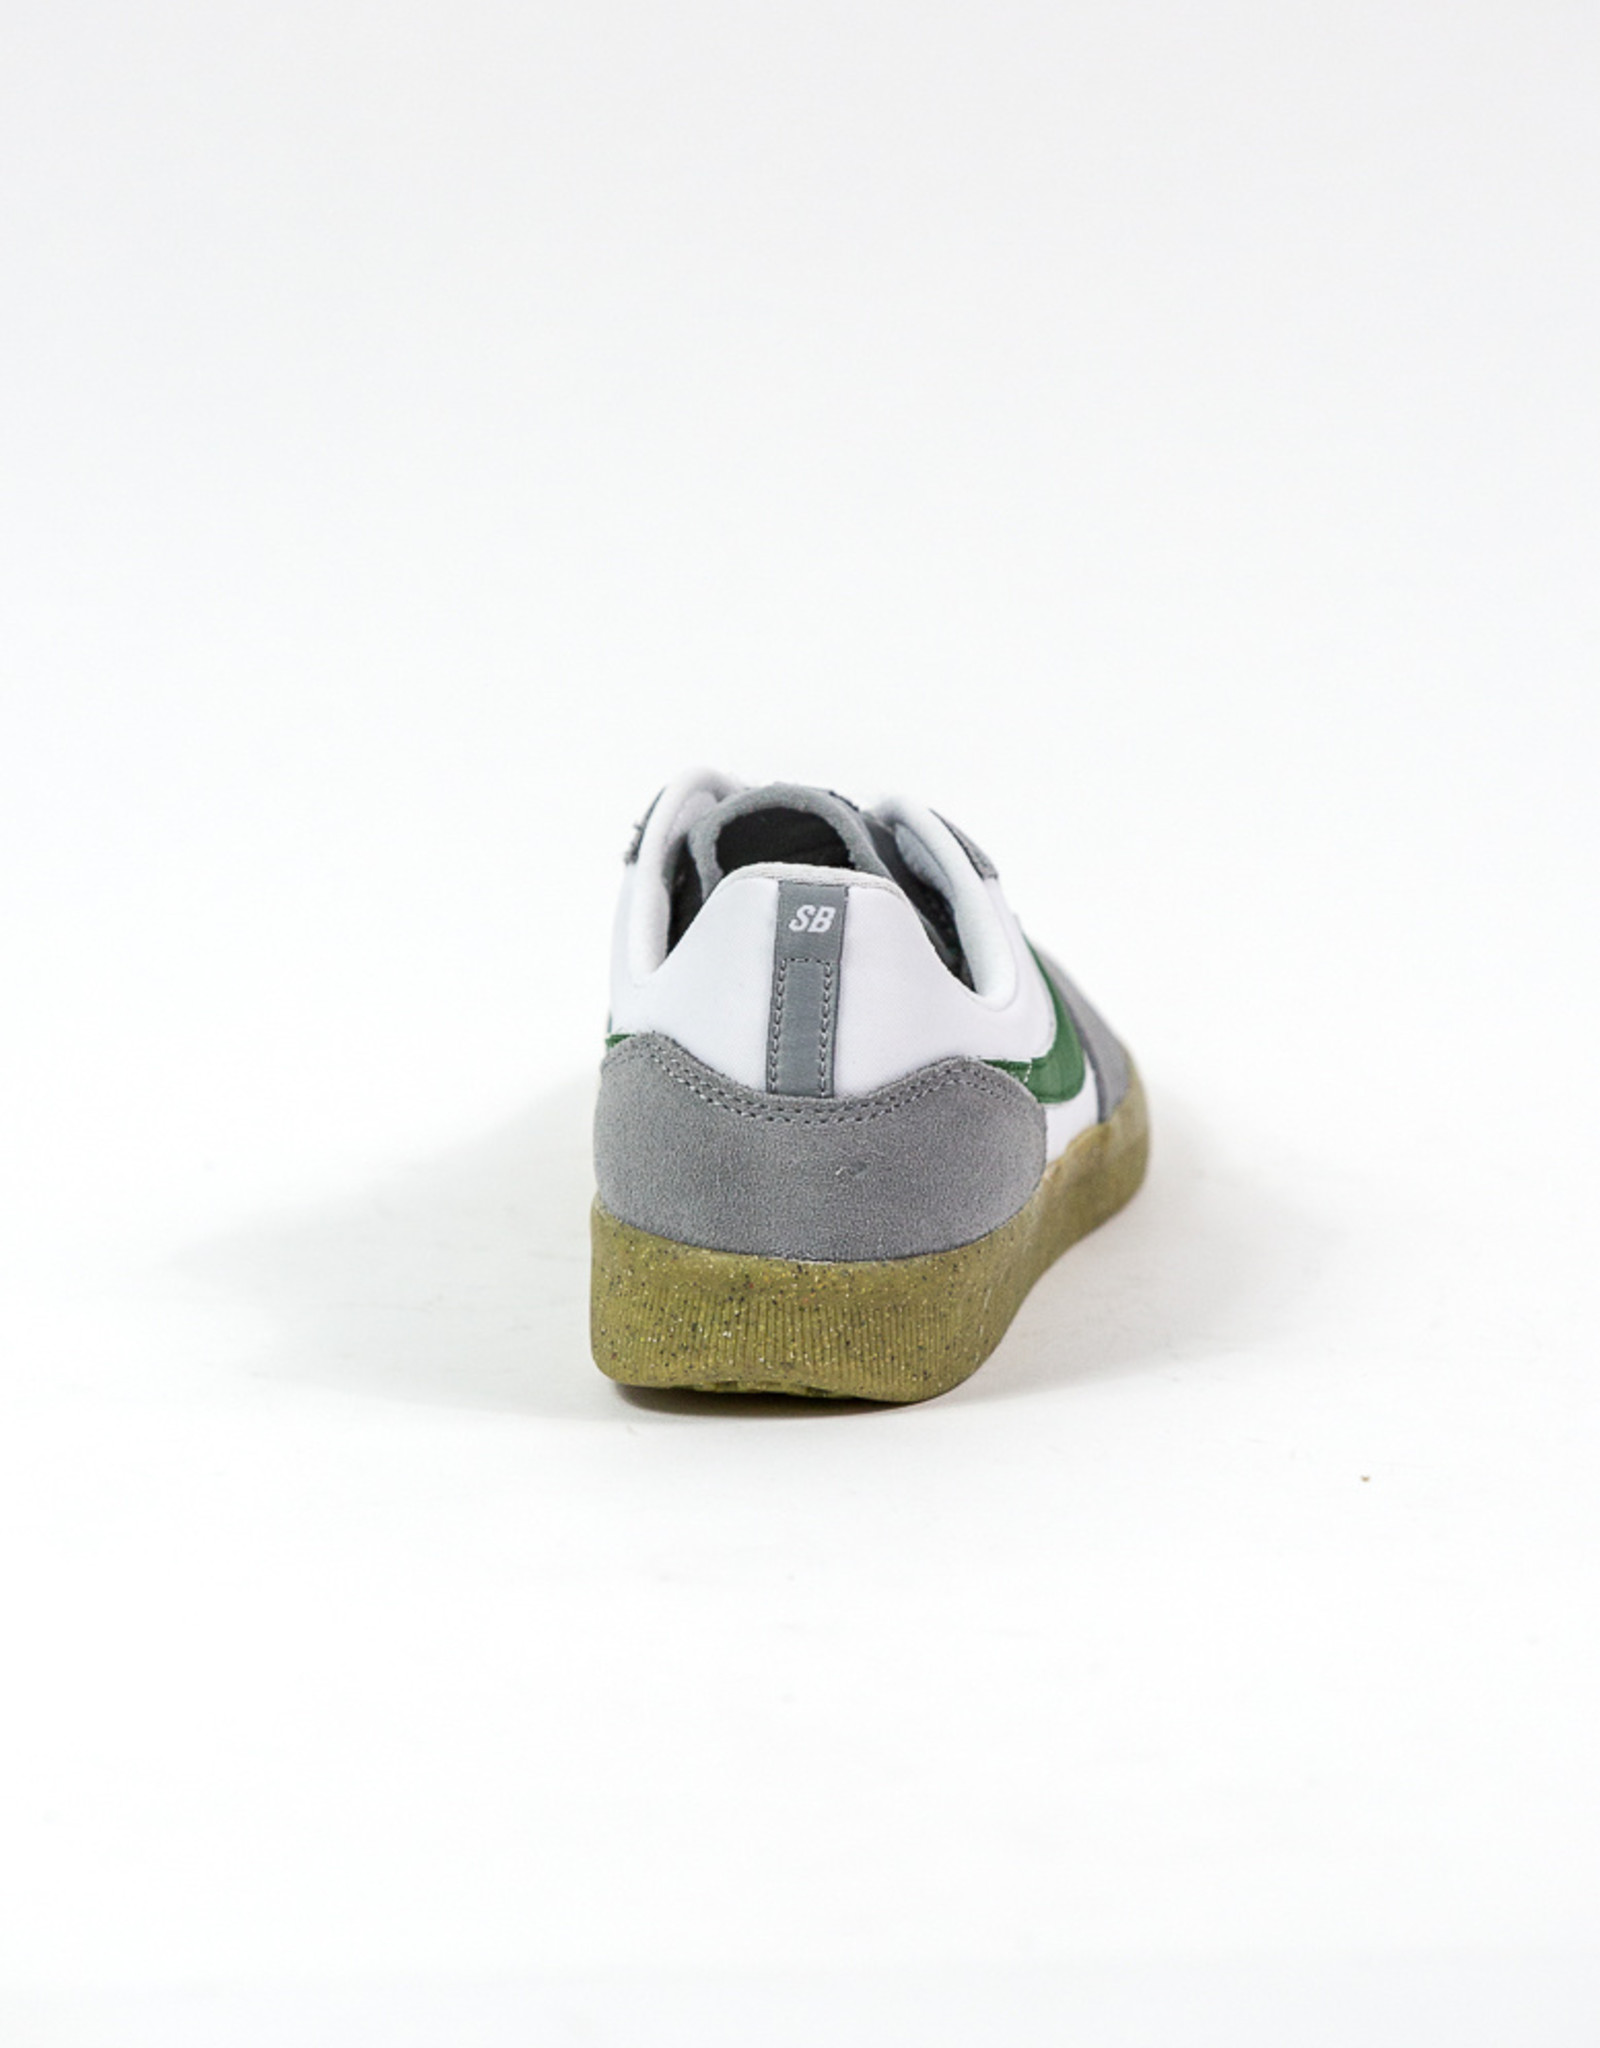 NIKE NIKE SB TEAM CLASSIC - PARTICLE GREY/FOREST GREEN